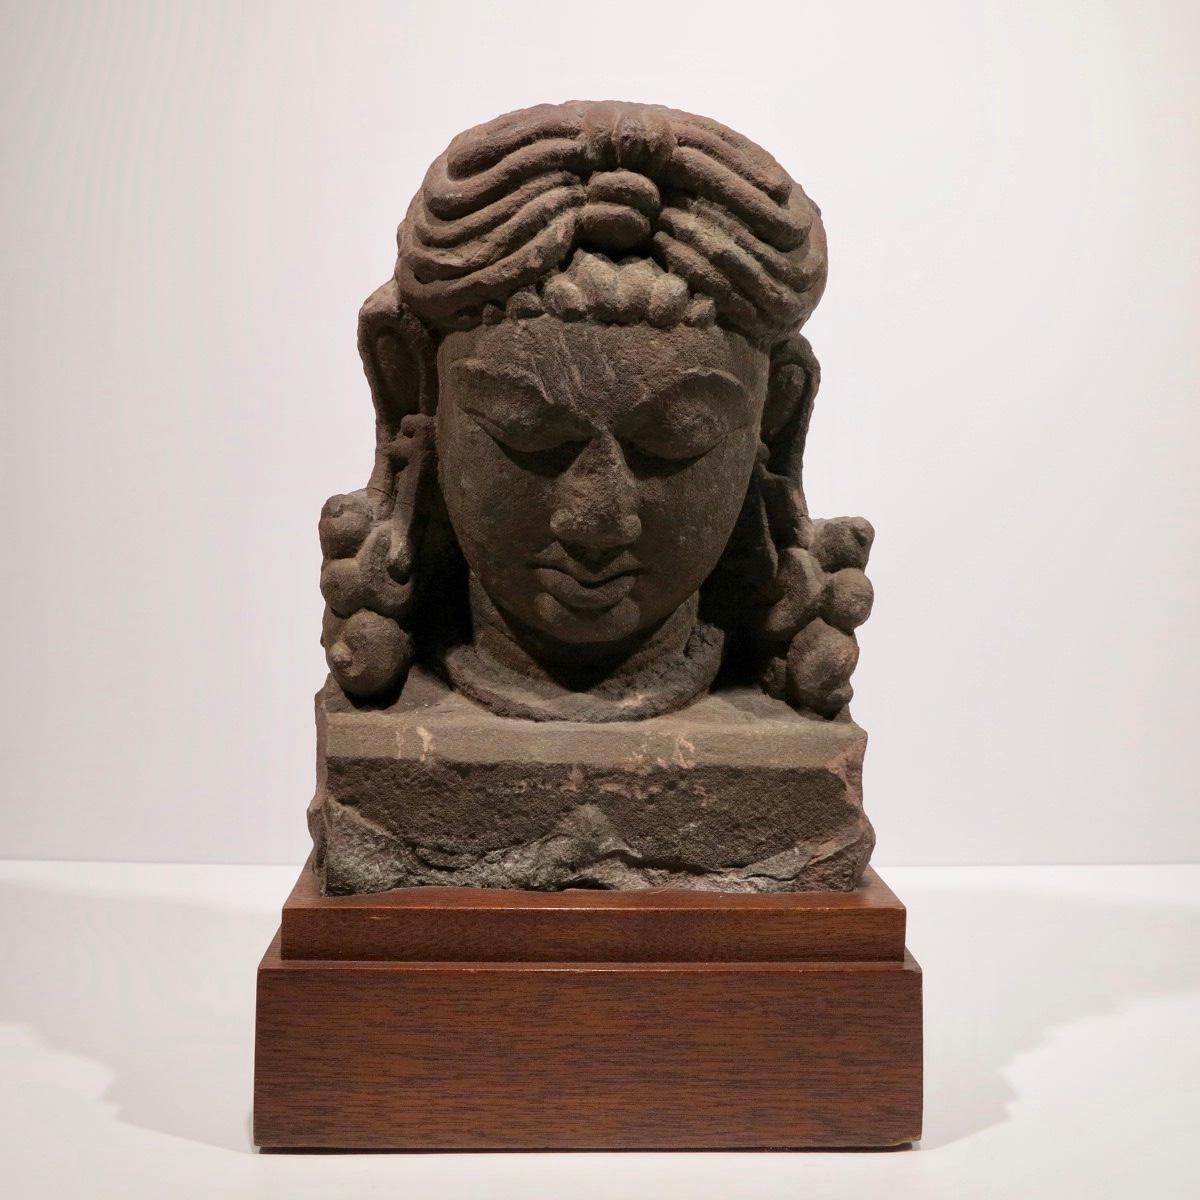 Unknown Figurative Sculpture - Head of Goddess, Central India, 8th Century